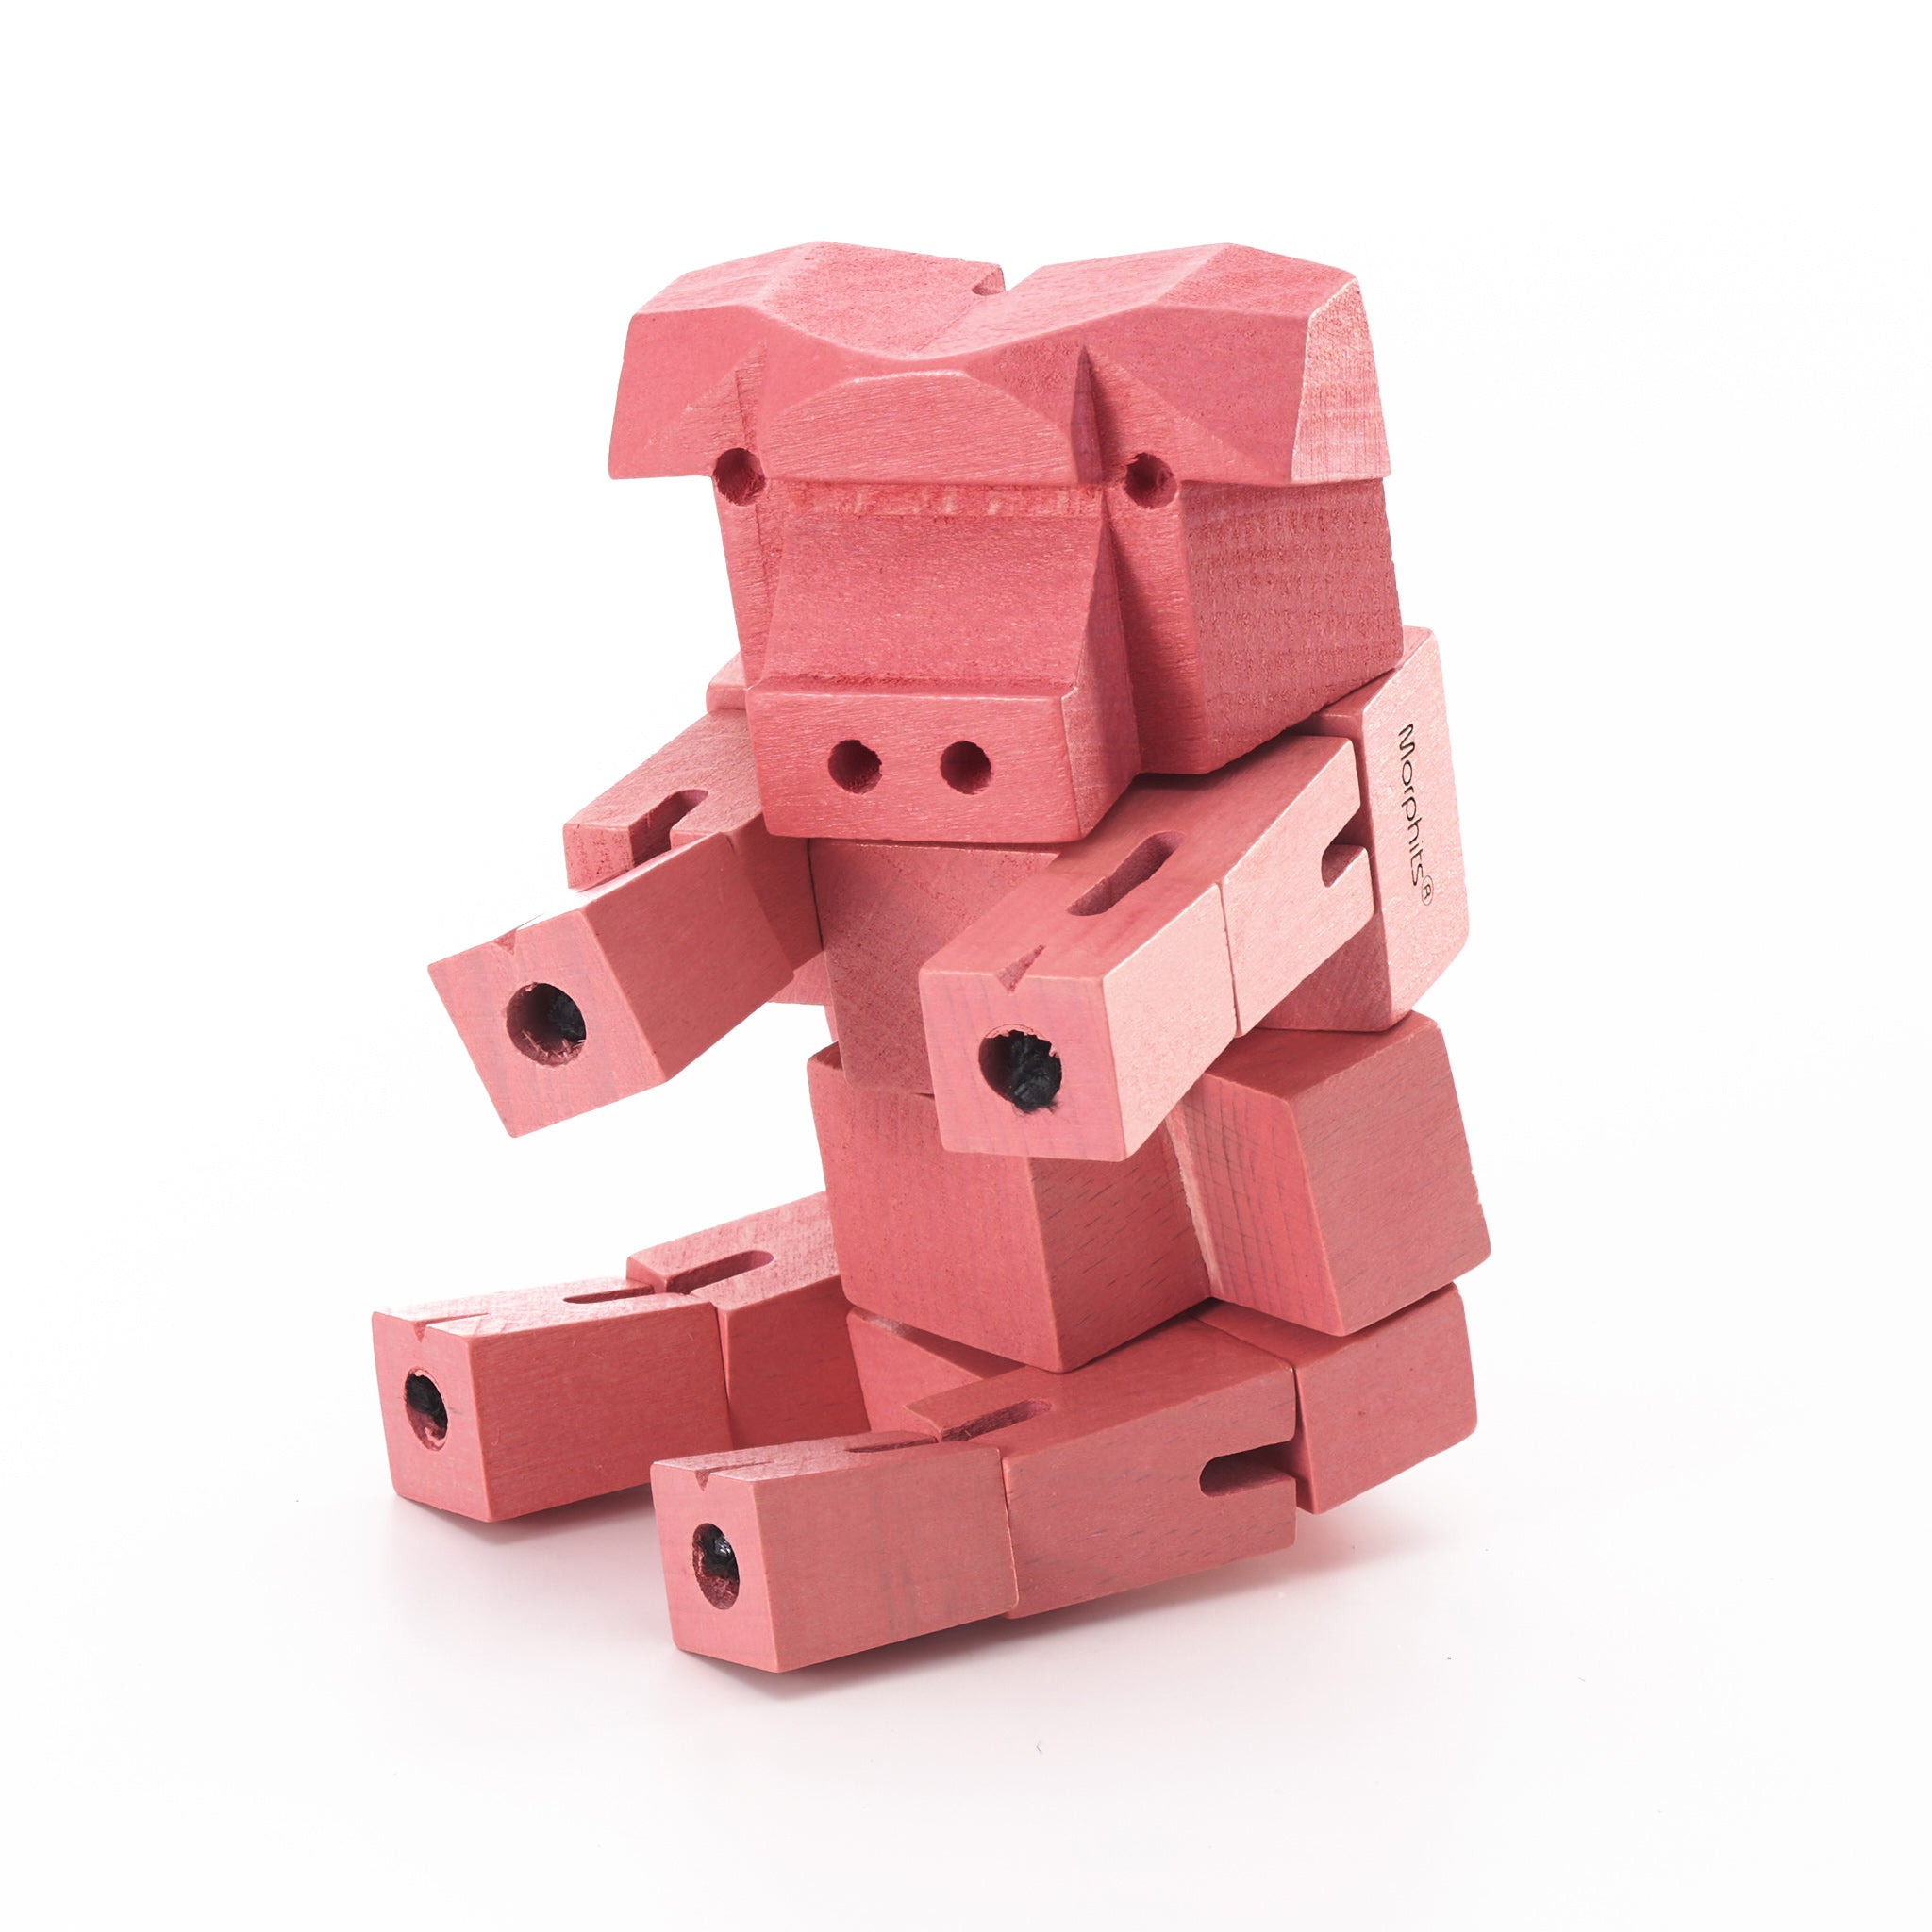 Morphits ® Pig Wooden Toy: Whimsical Wooden Playset Companions for Imaginative Minds - Yoshiaki Ito Design Sit P1